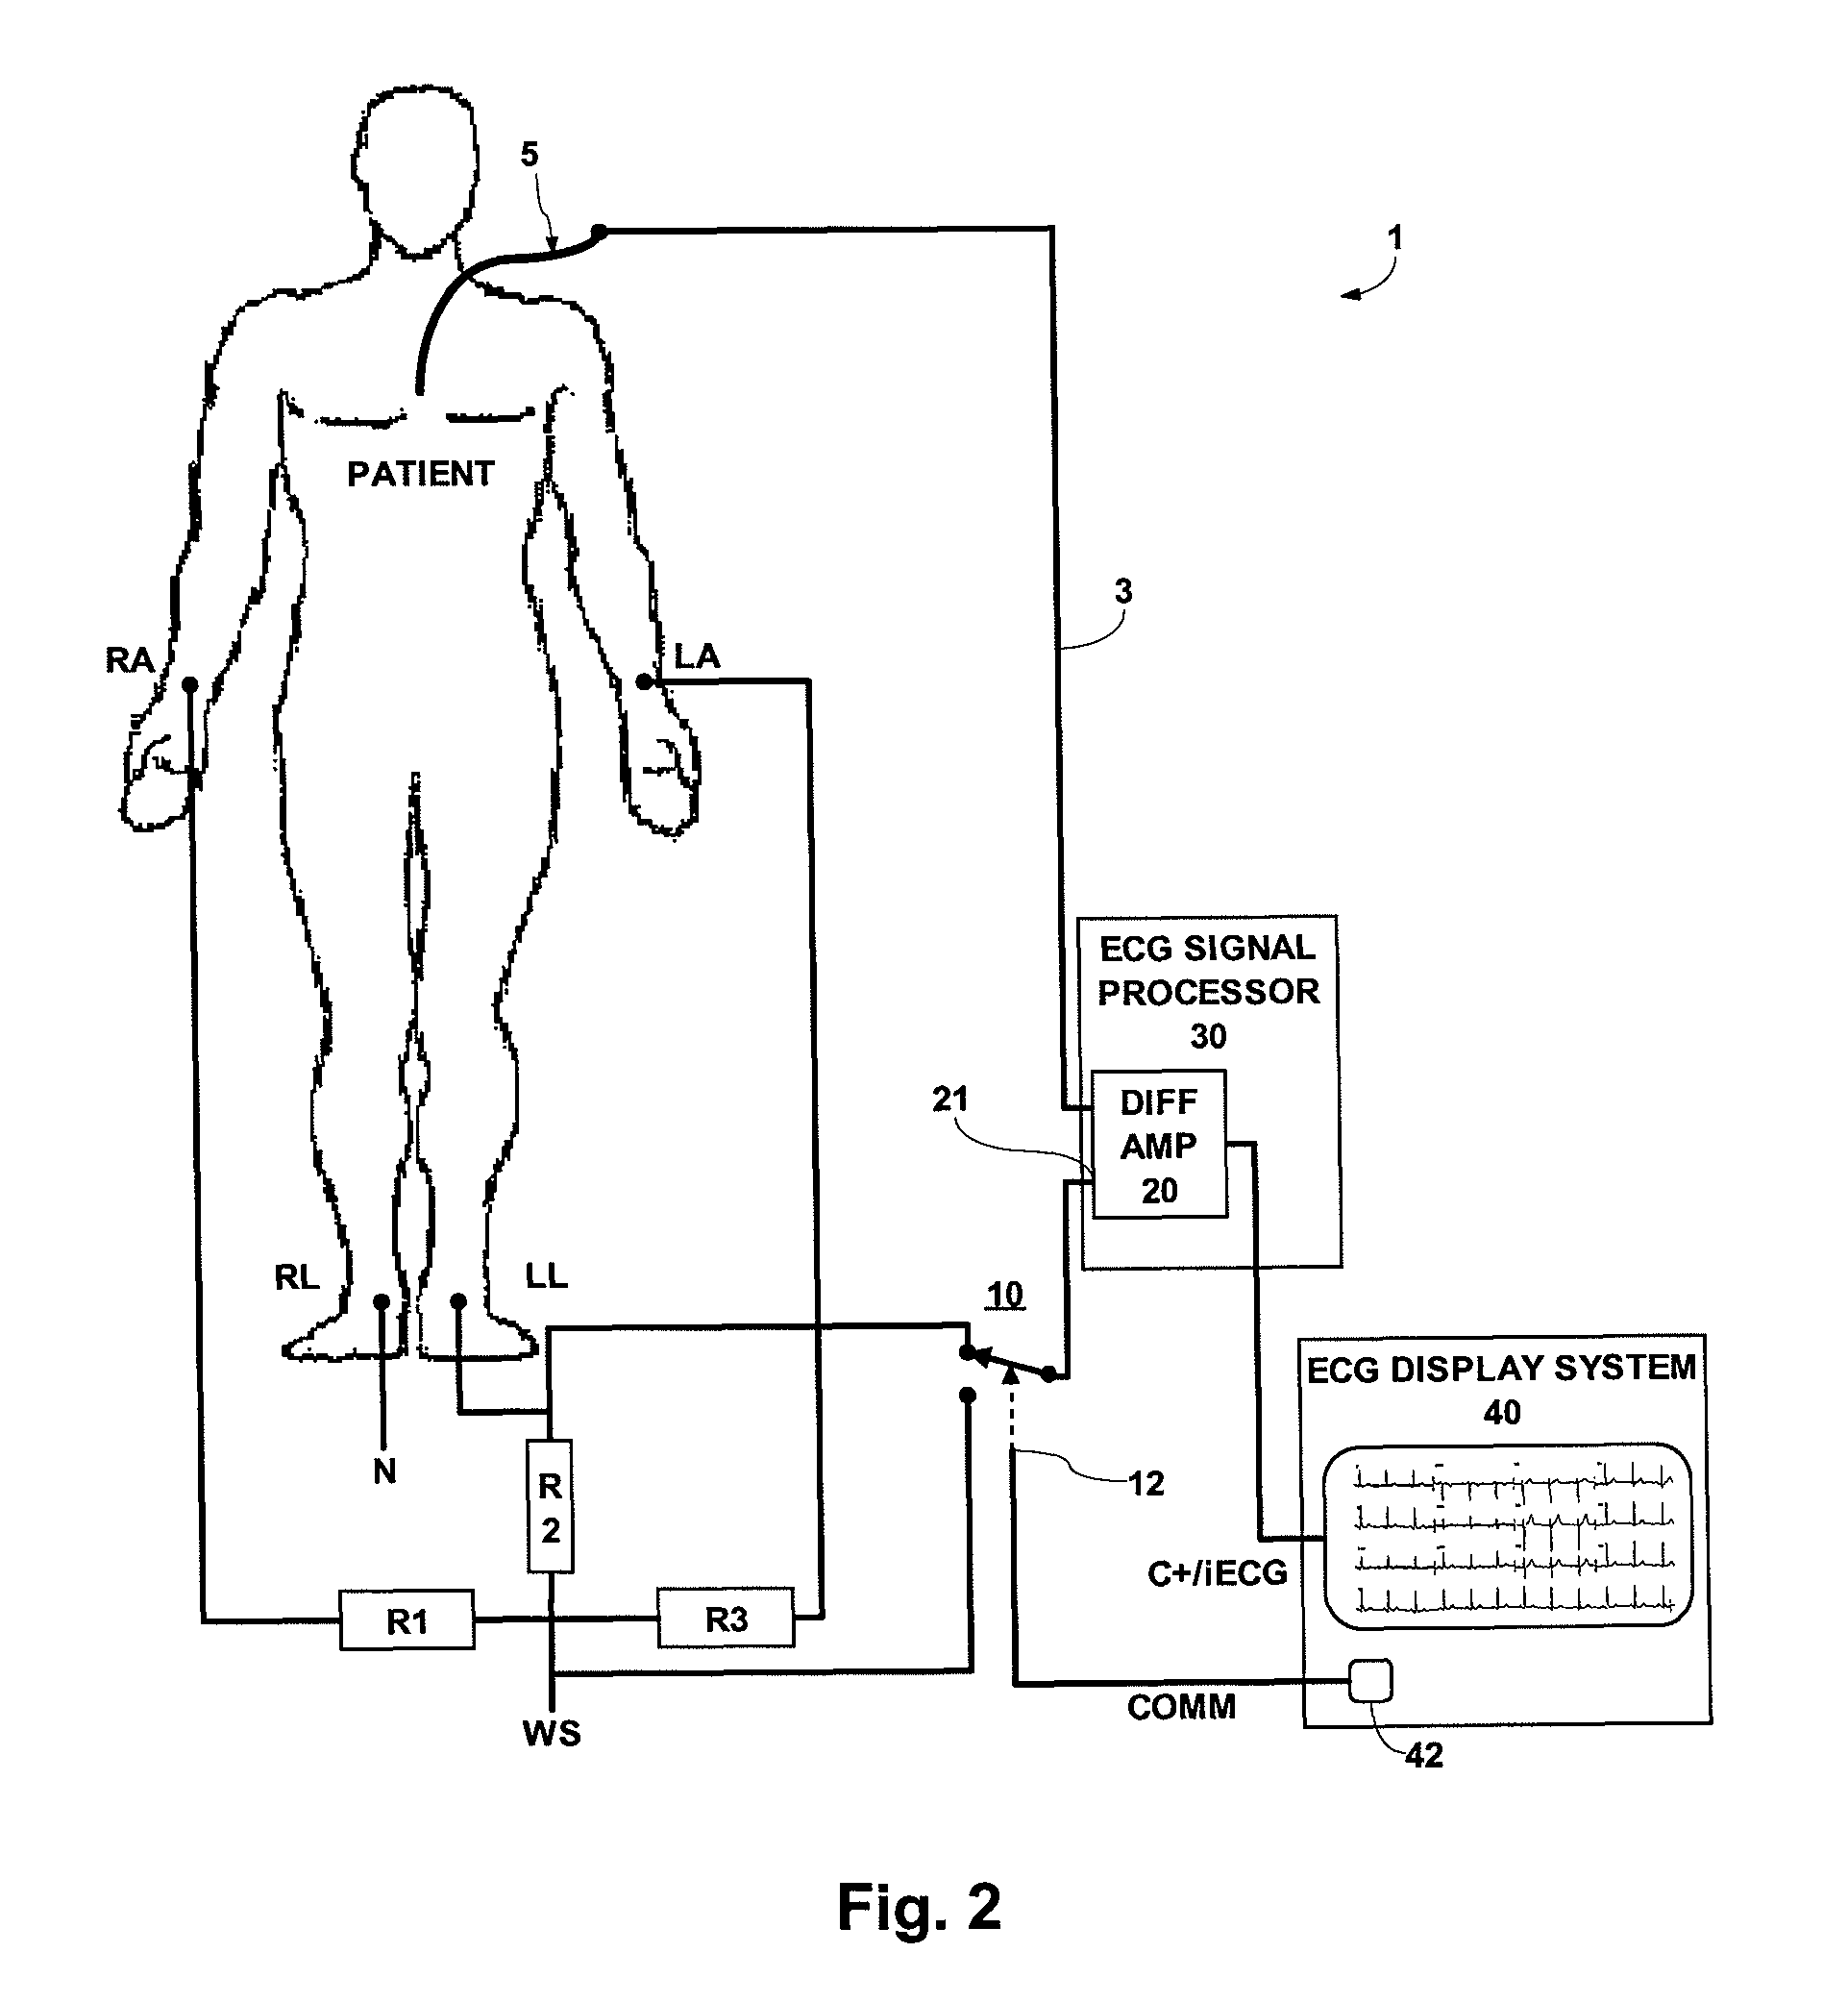 ECG system for use in ECG signal measurement of intra-cardiac ECG using a catheter